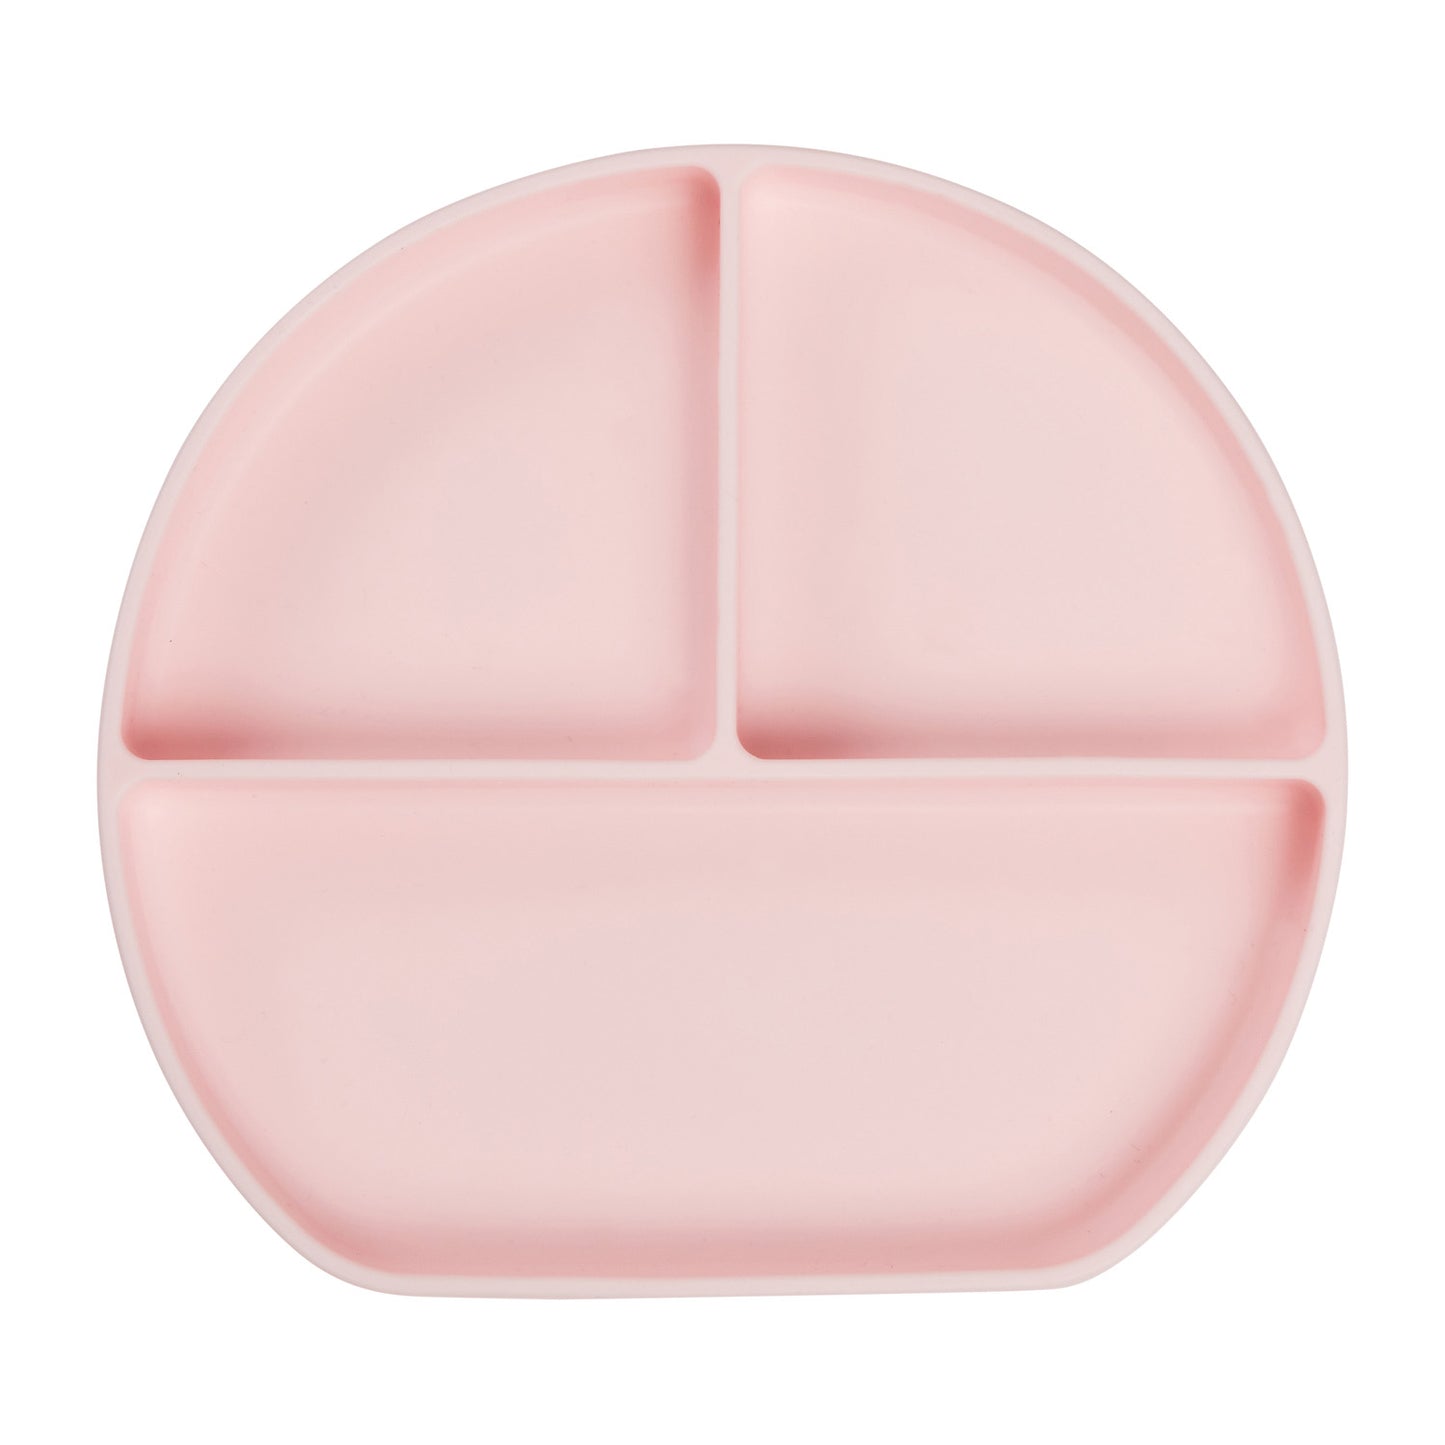 Splosh Baby Silicone Suction Plate - Pink